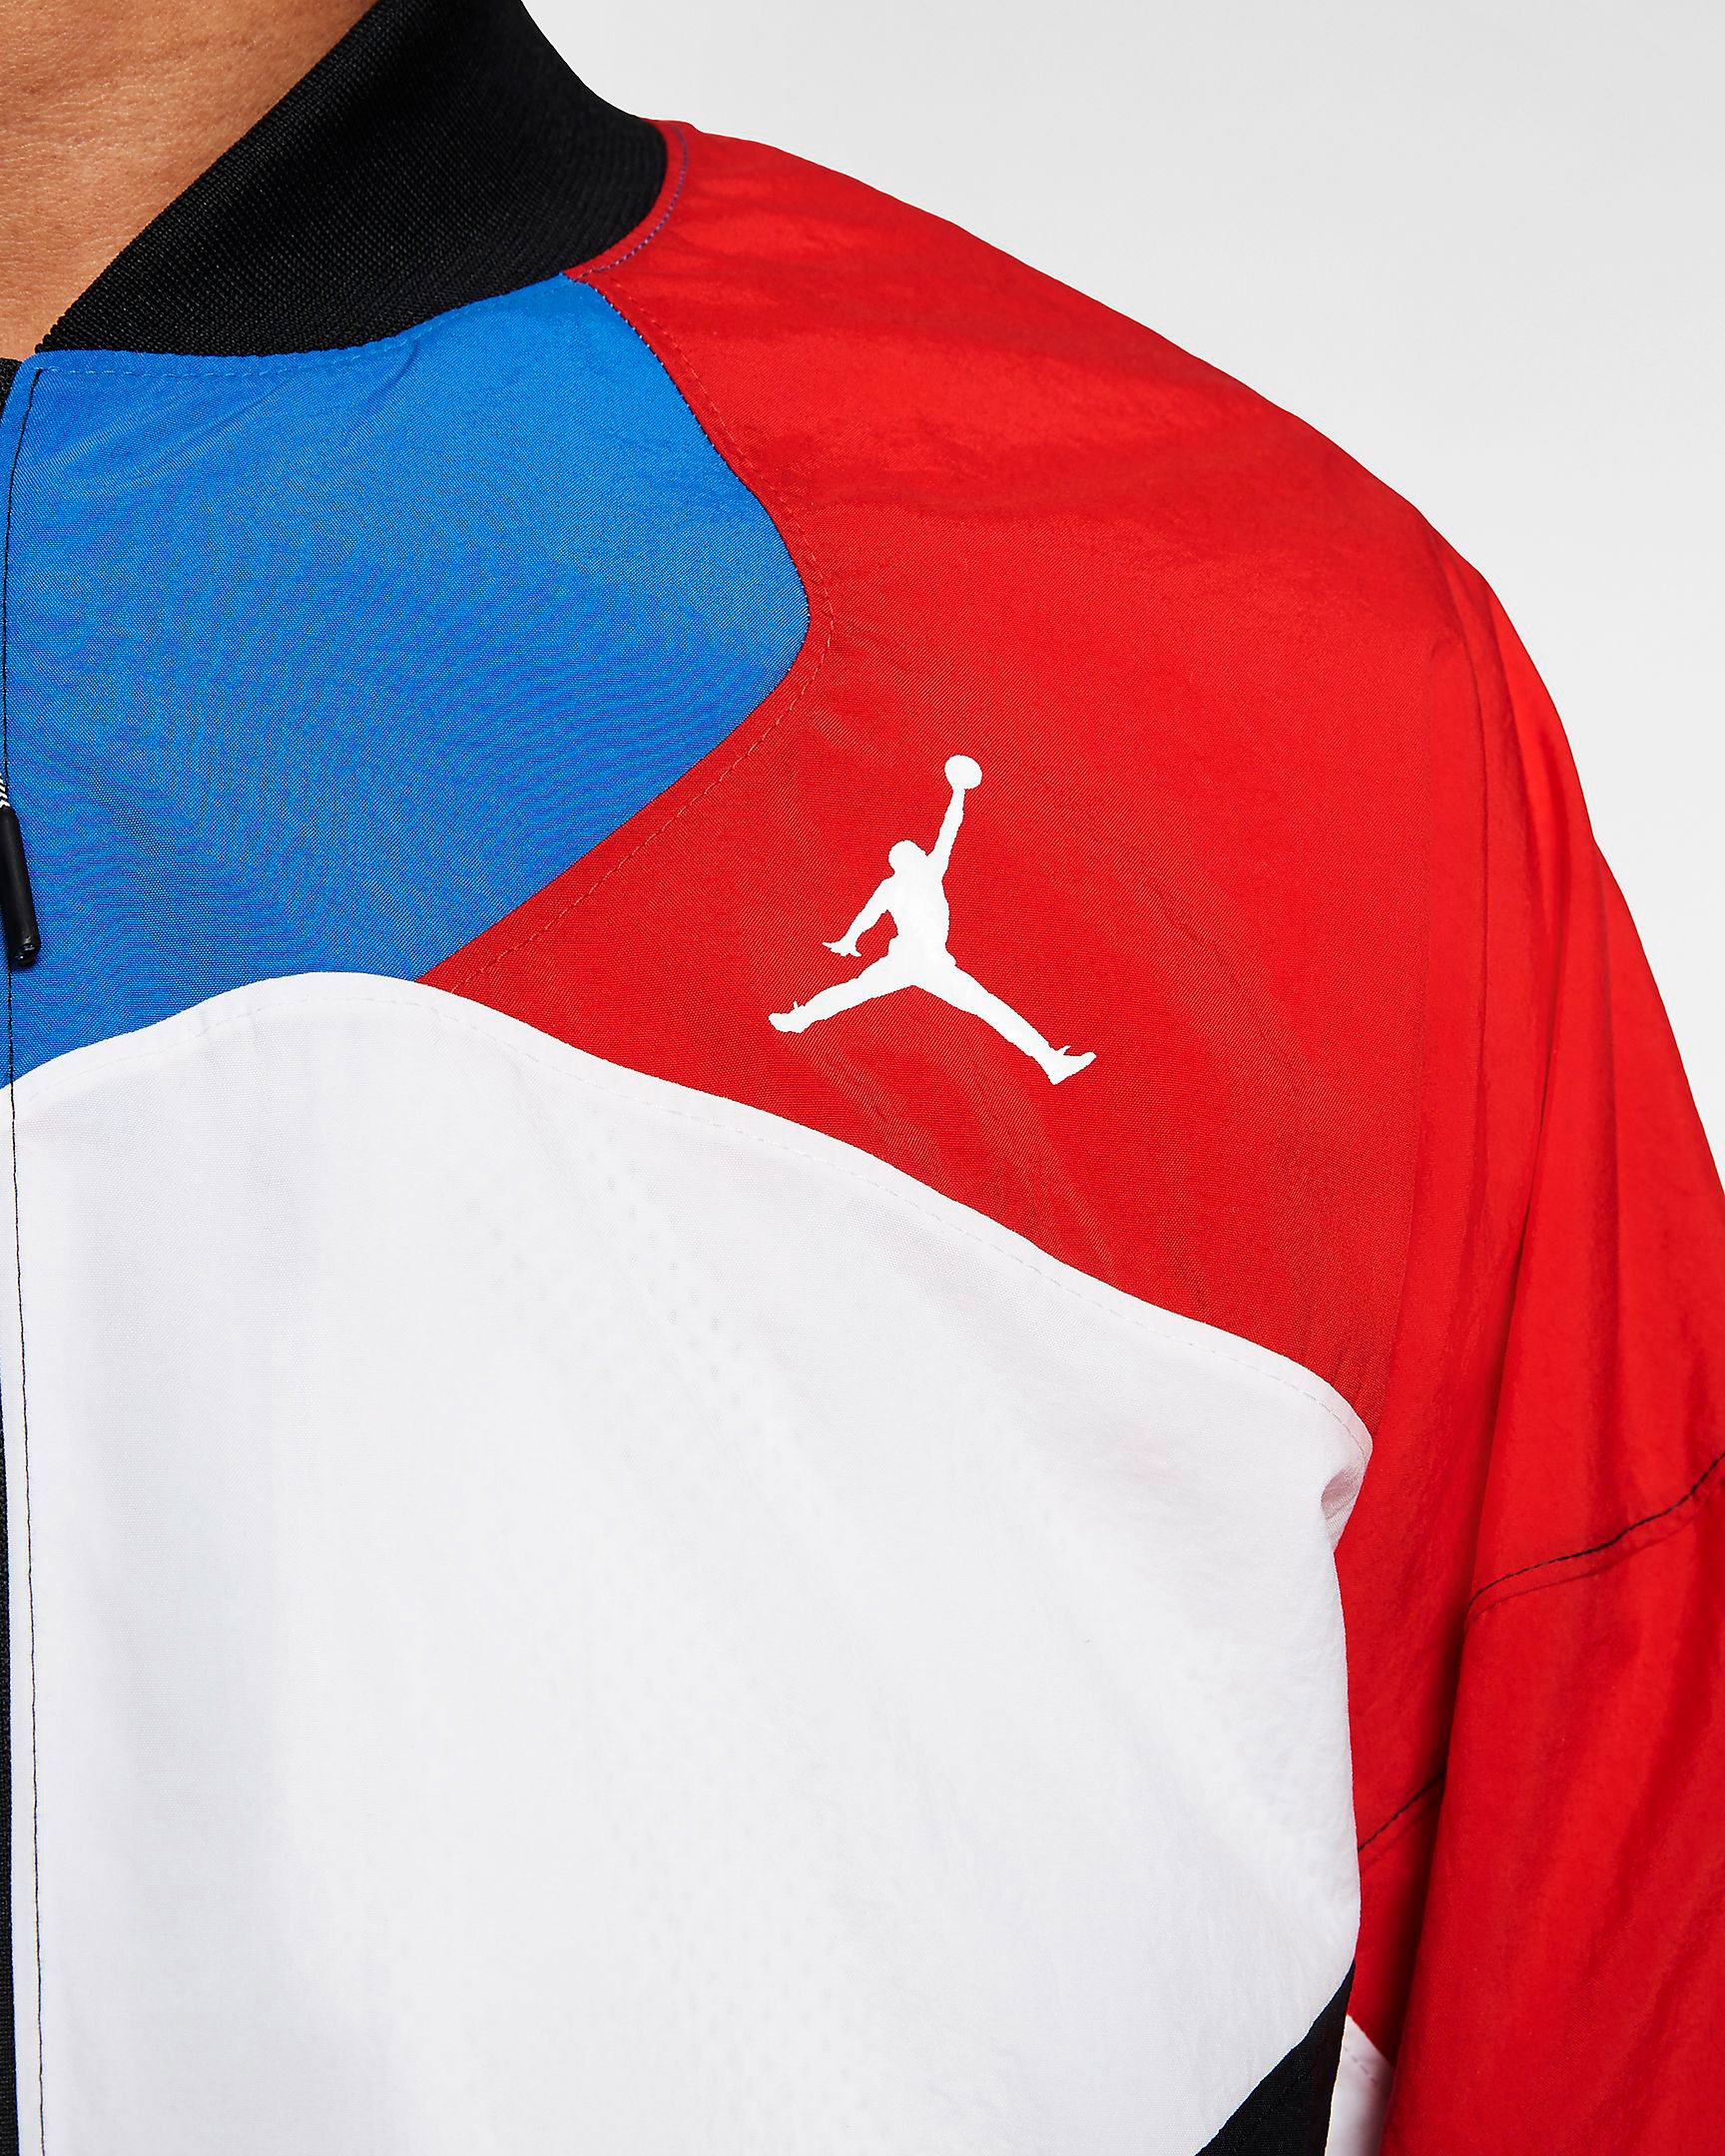 what-the-air-jordan-4-jacket-red-blue-4